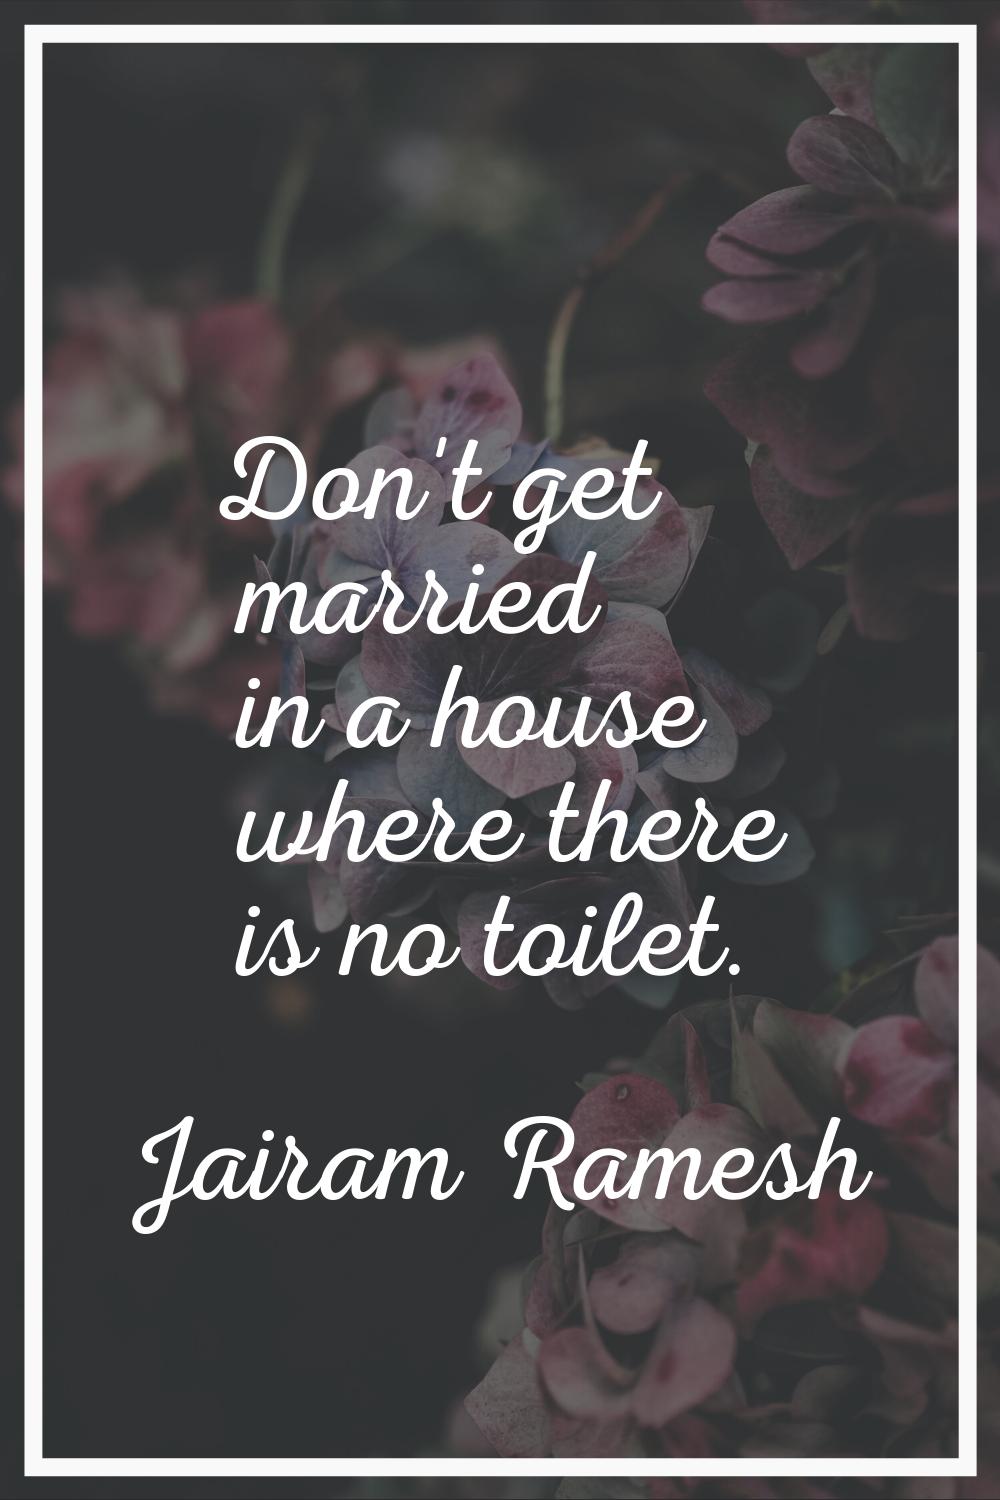 Don't get married in a house where there is no toilet.